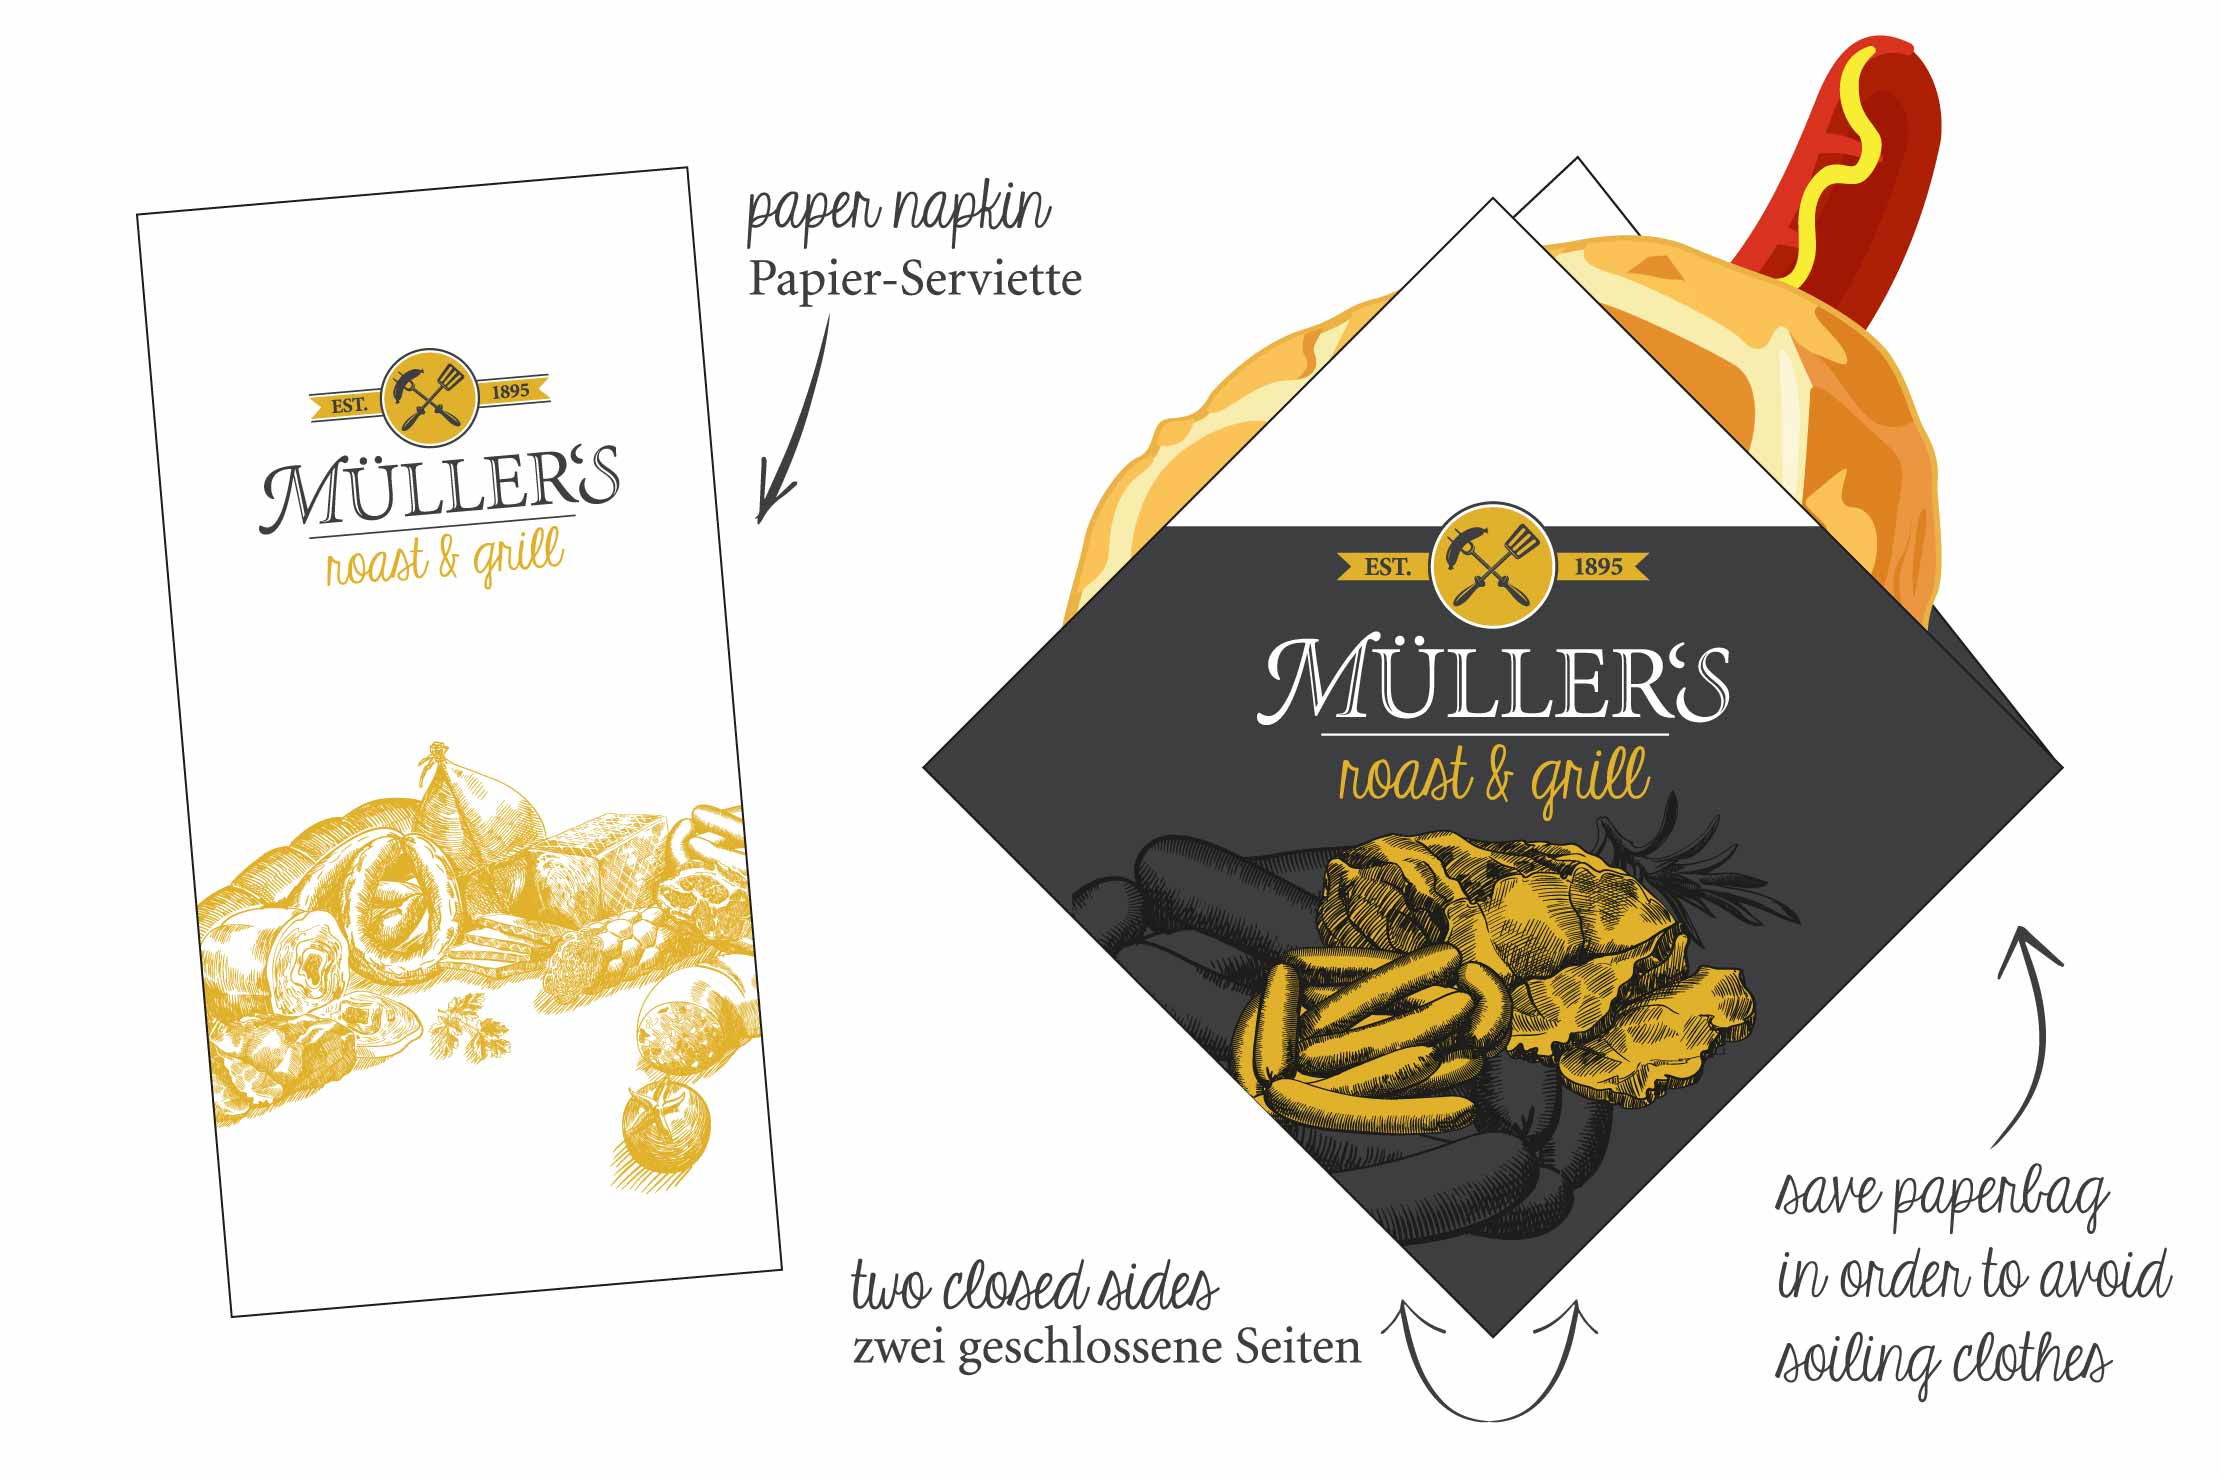 Müller's Roast & Grill: Verpackung